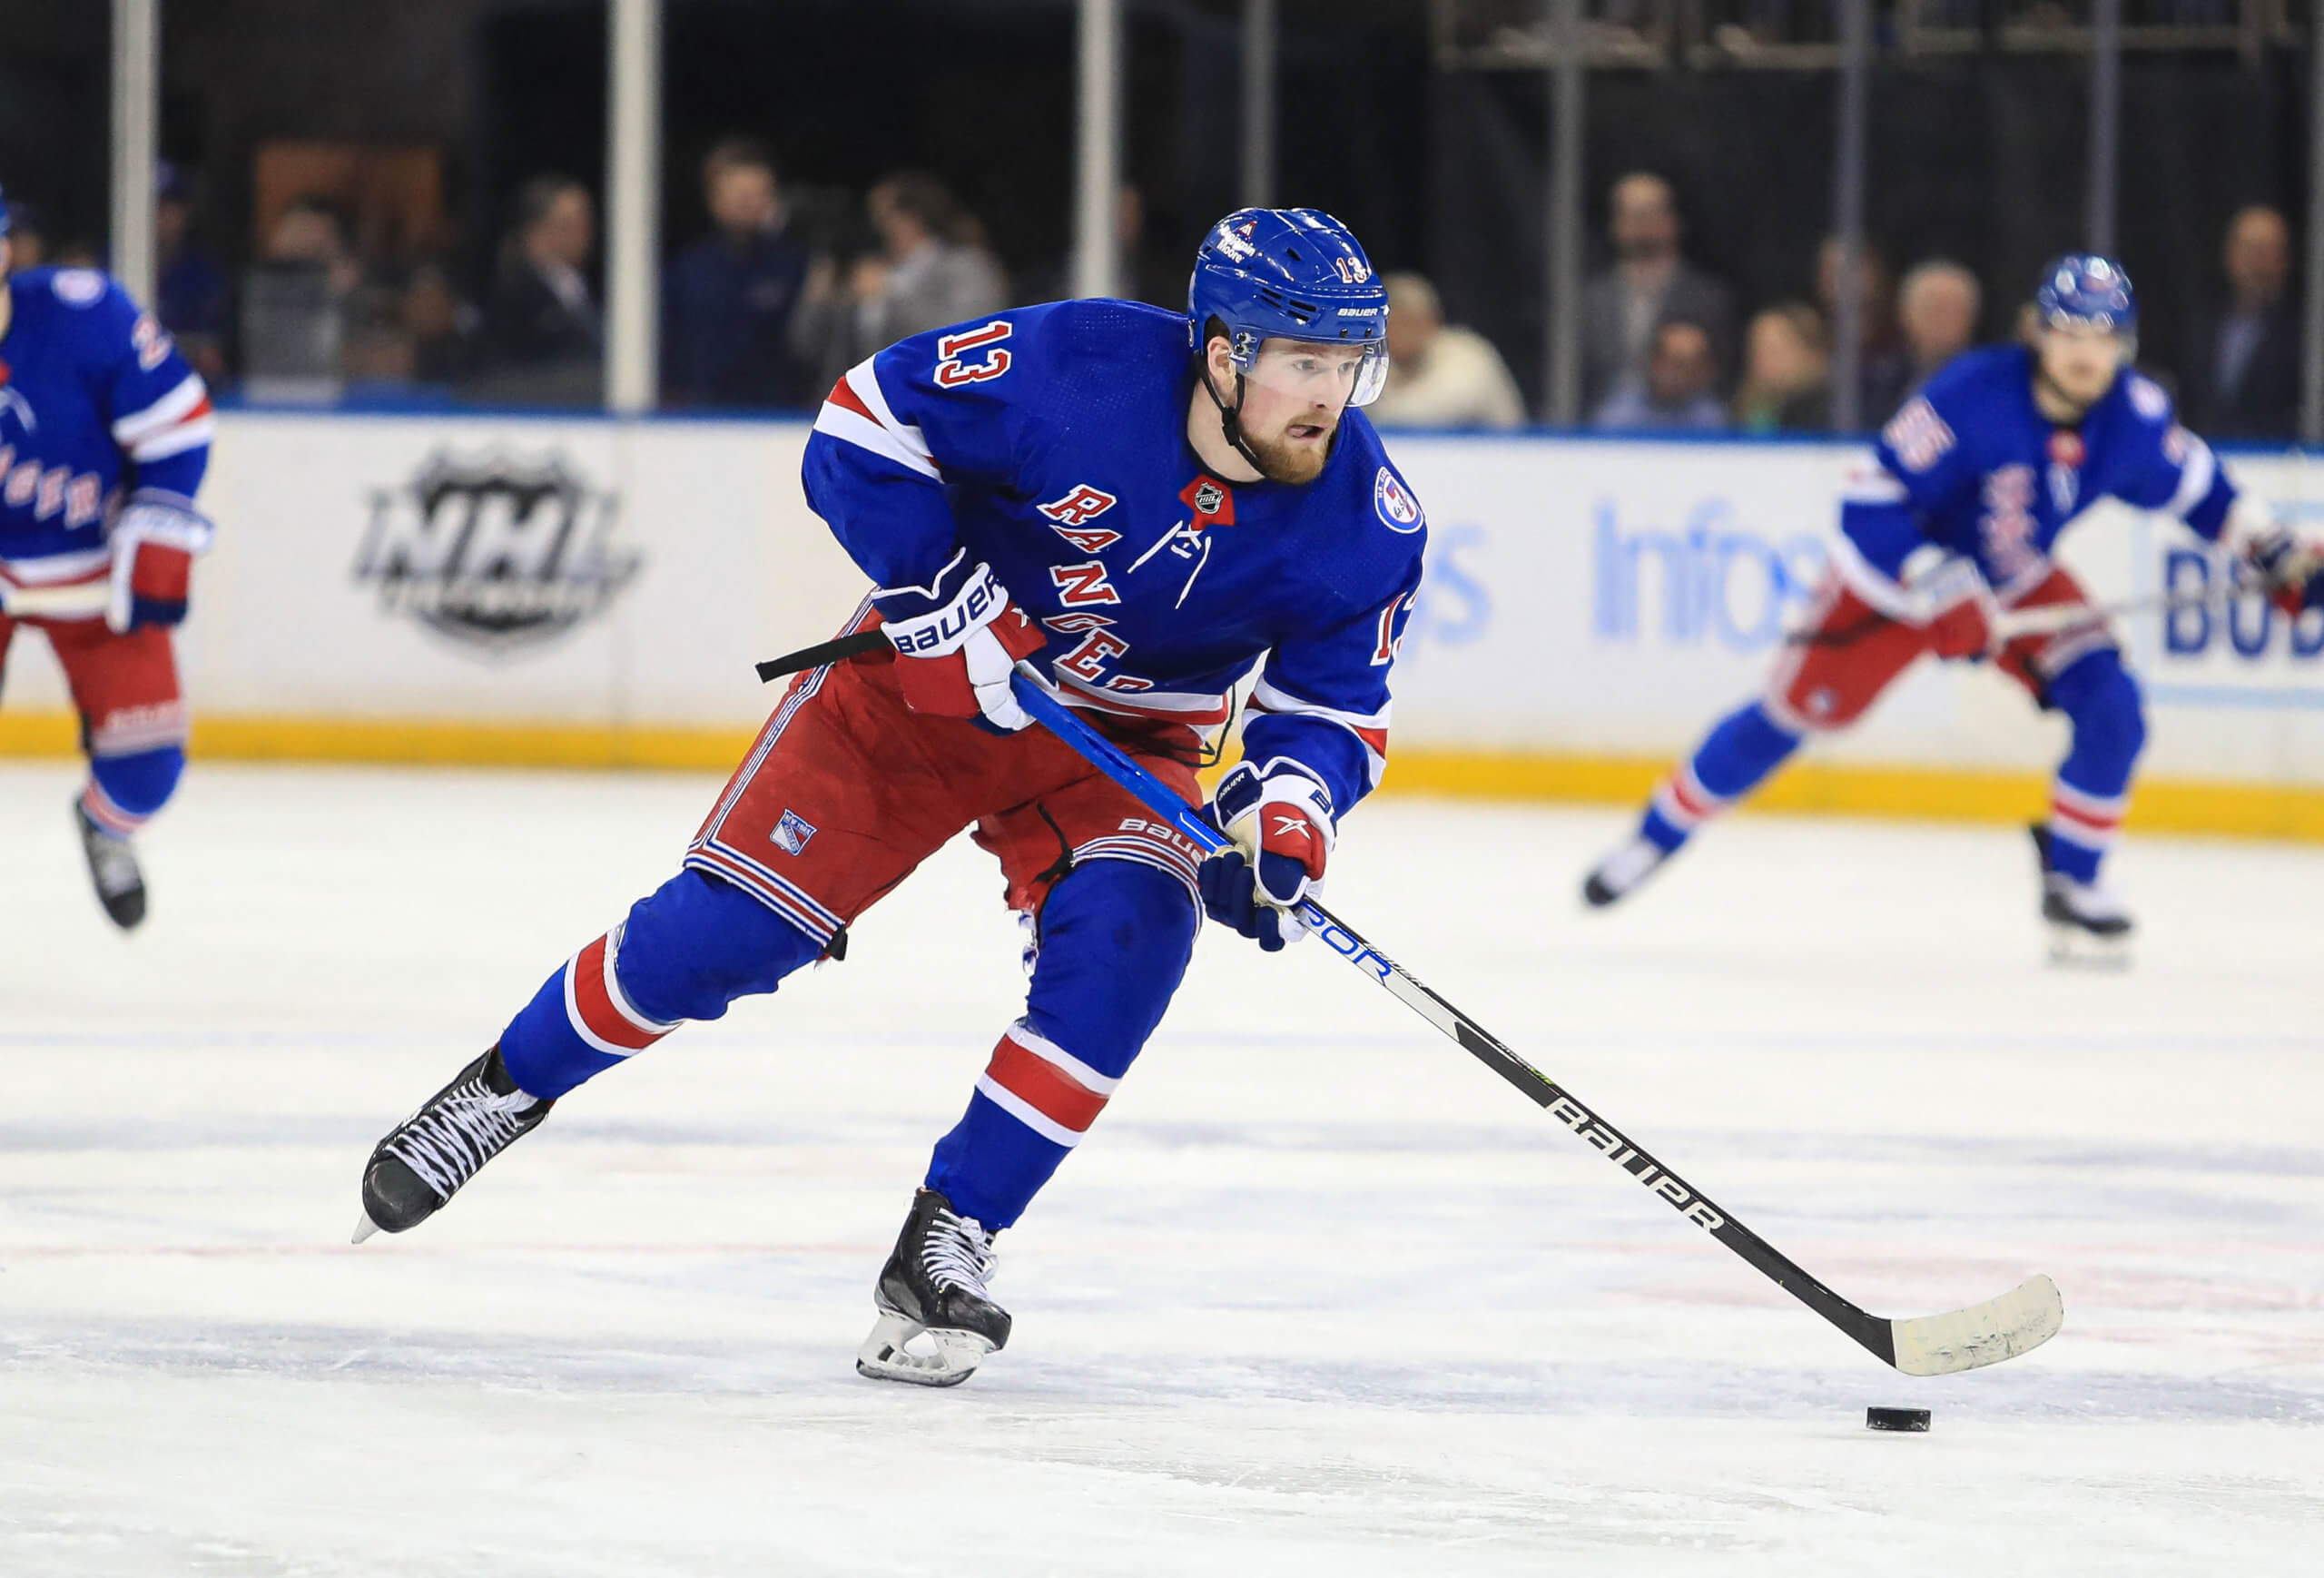 Alexis Lafreniere's Rangers emergence continues